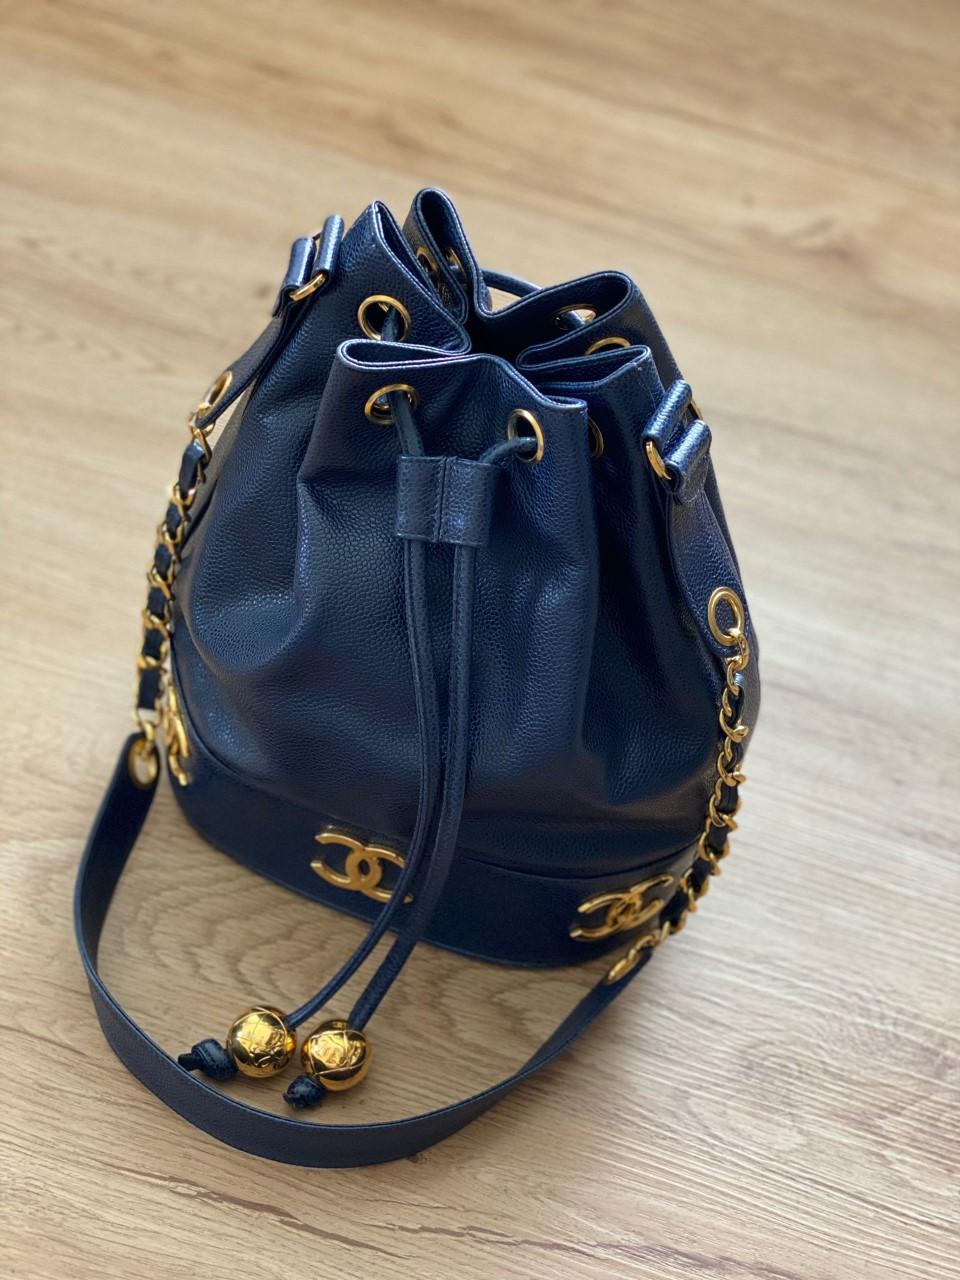 Navy Blue extremely rare color ONLY ONE on the market!

Gently used with minor scratches to CC hardware 
Minimal wear on bottom corner barely noticeable other areas are in excellent condition
includes interior pouch to place cosmetics or credit